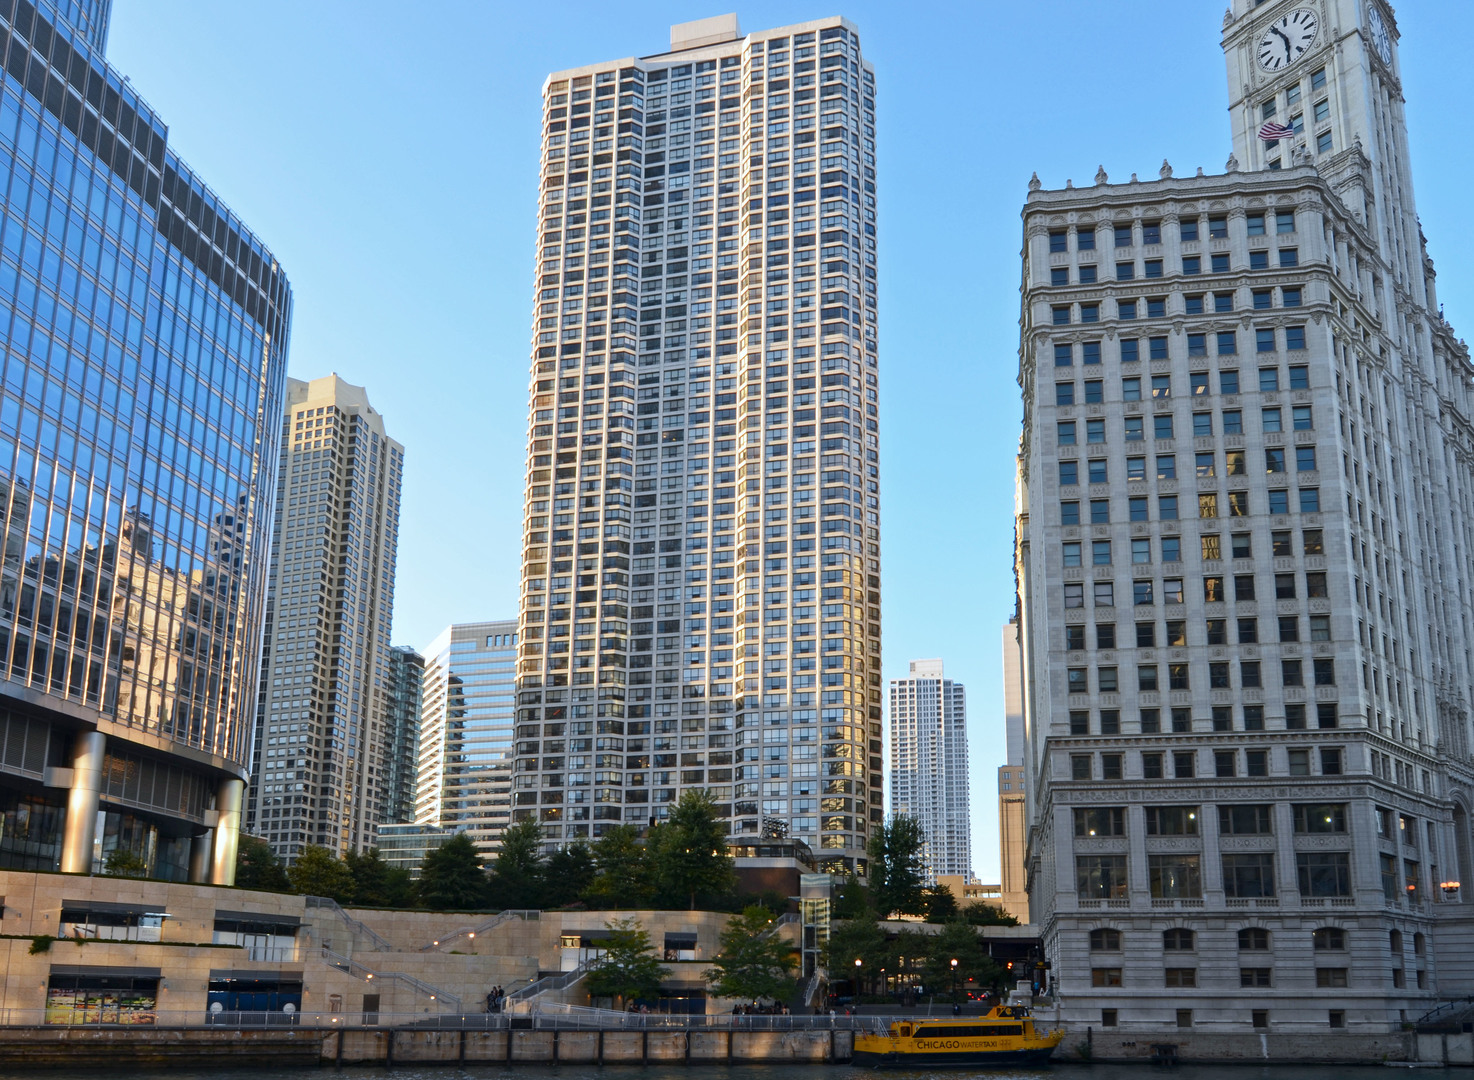 a city view with tall buildings